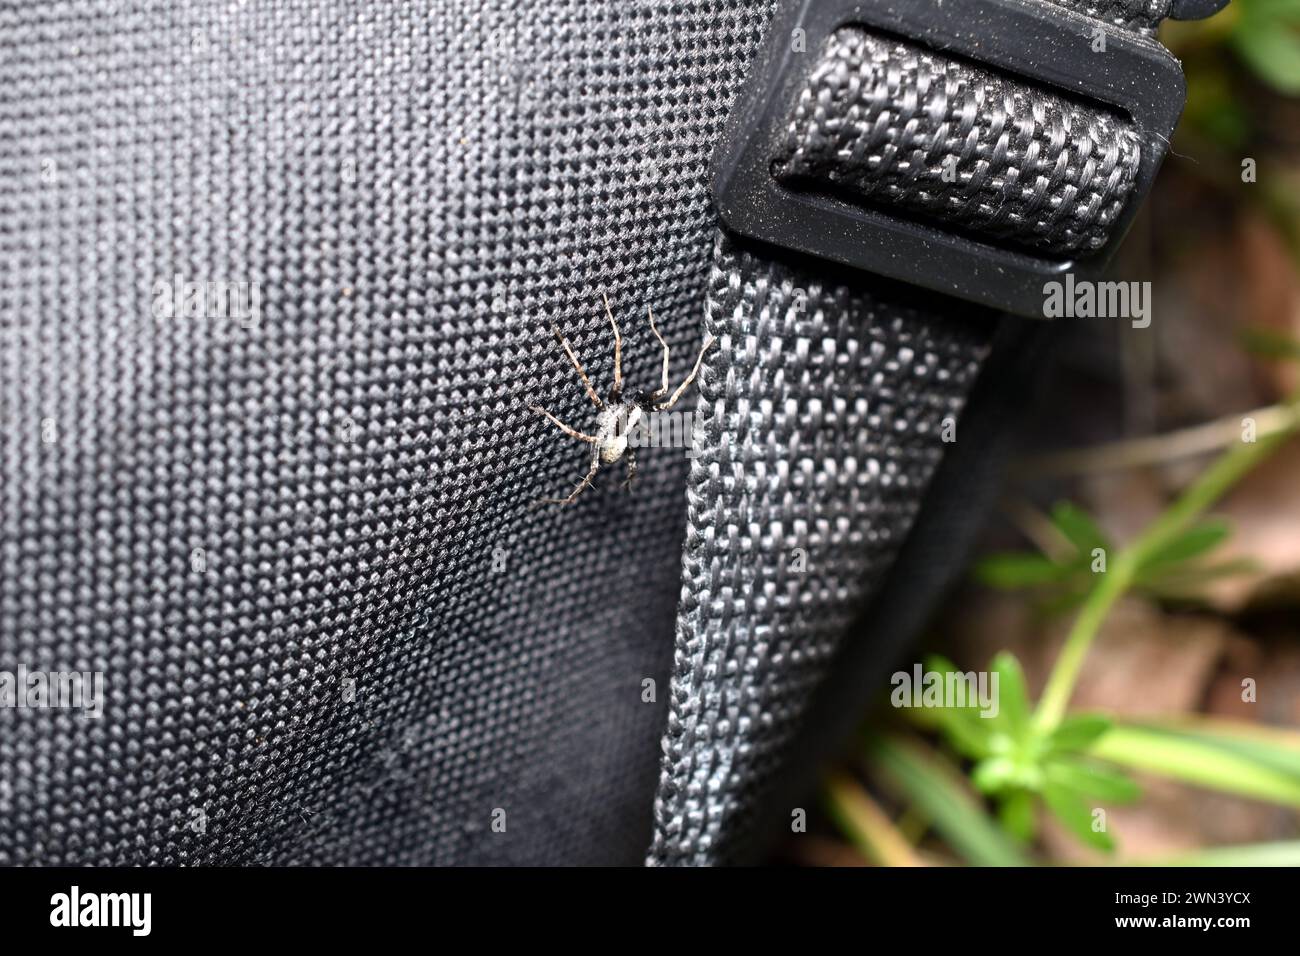 A bloodthirsty gray spider crawls along a bag left on the grass. Stock Photo